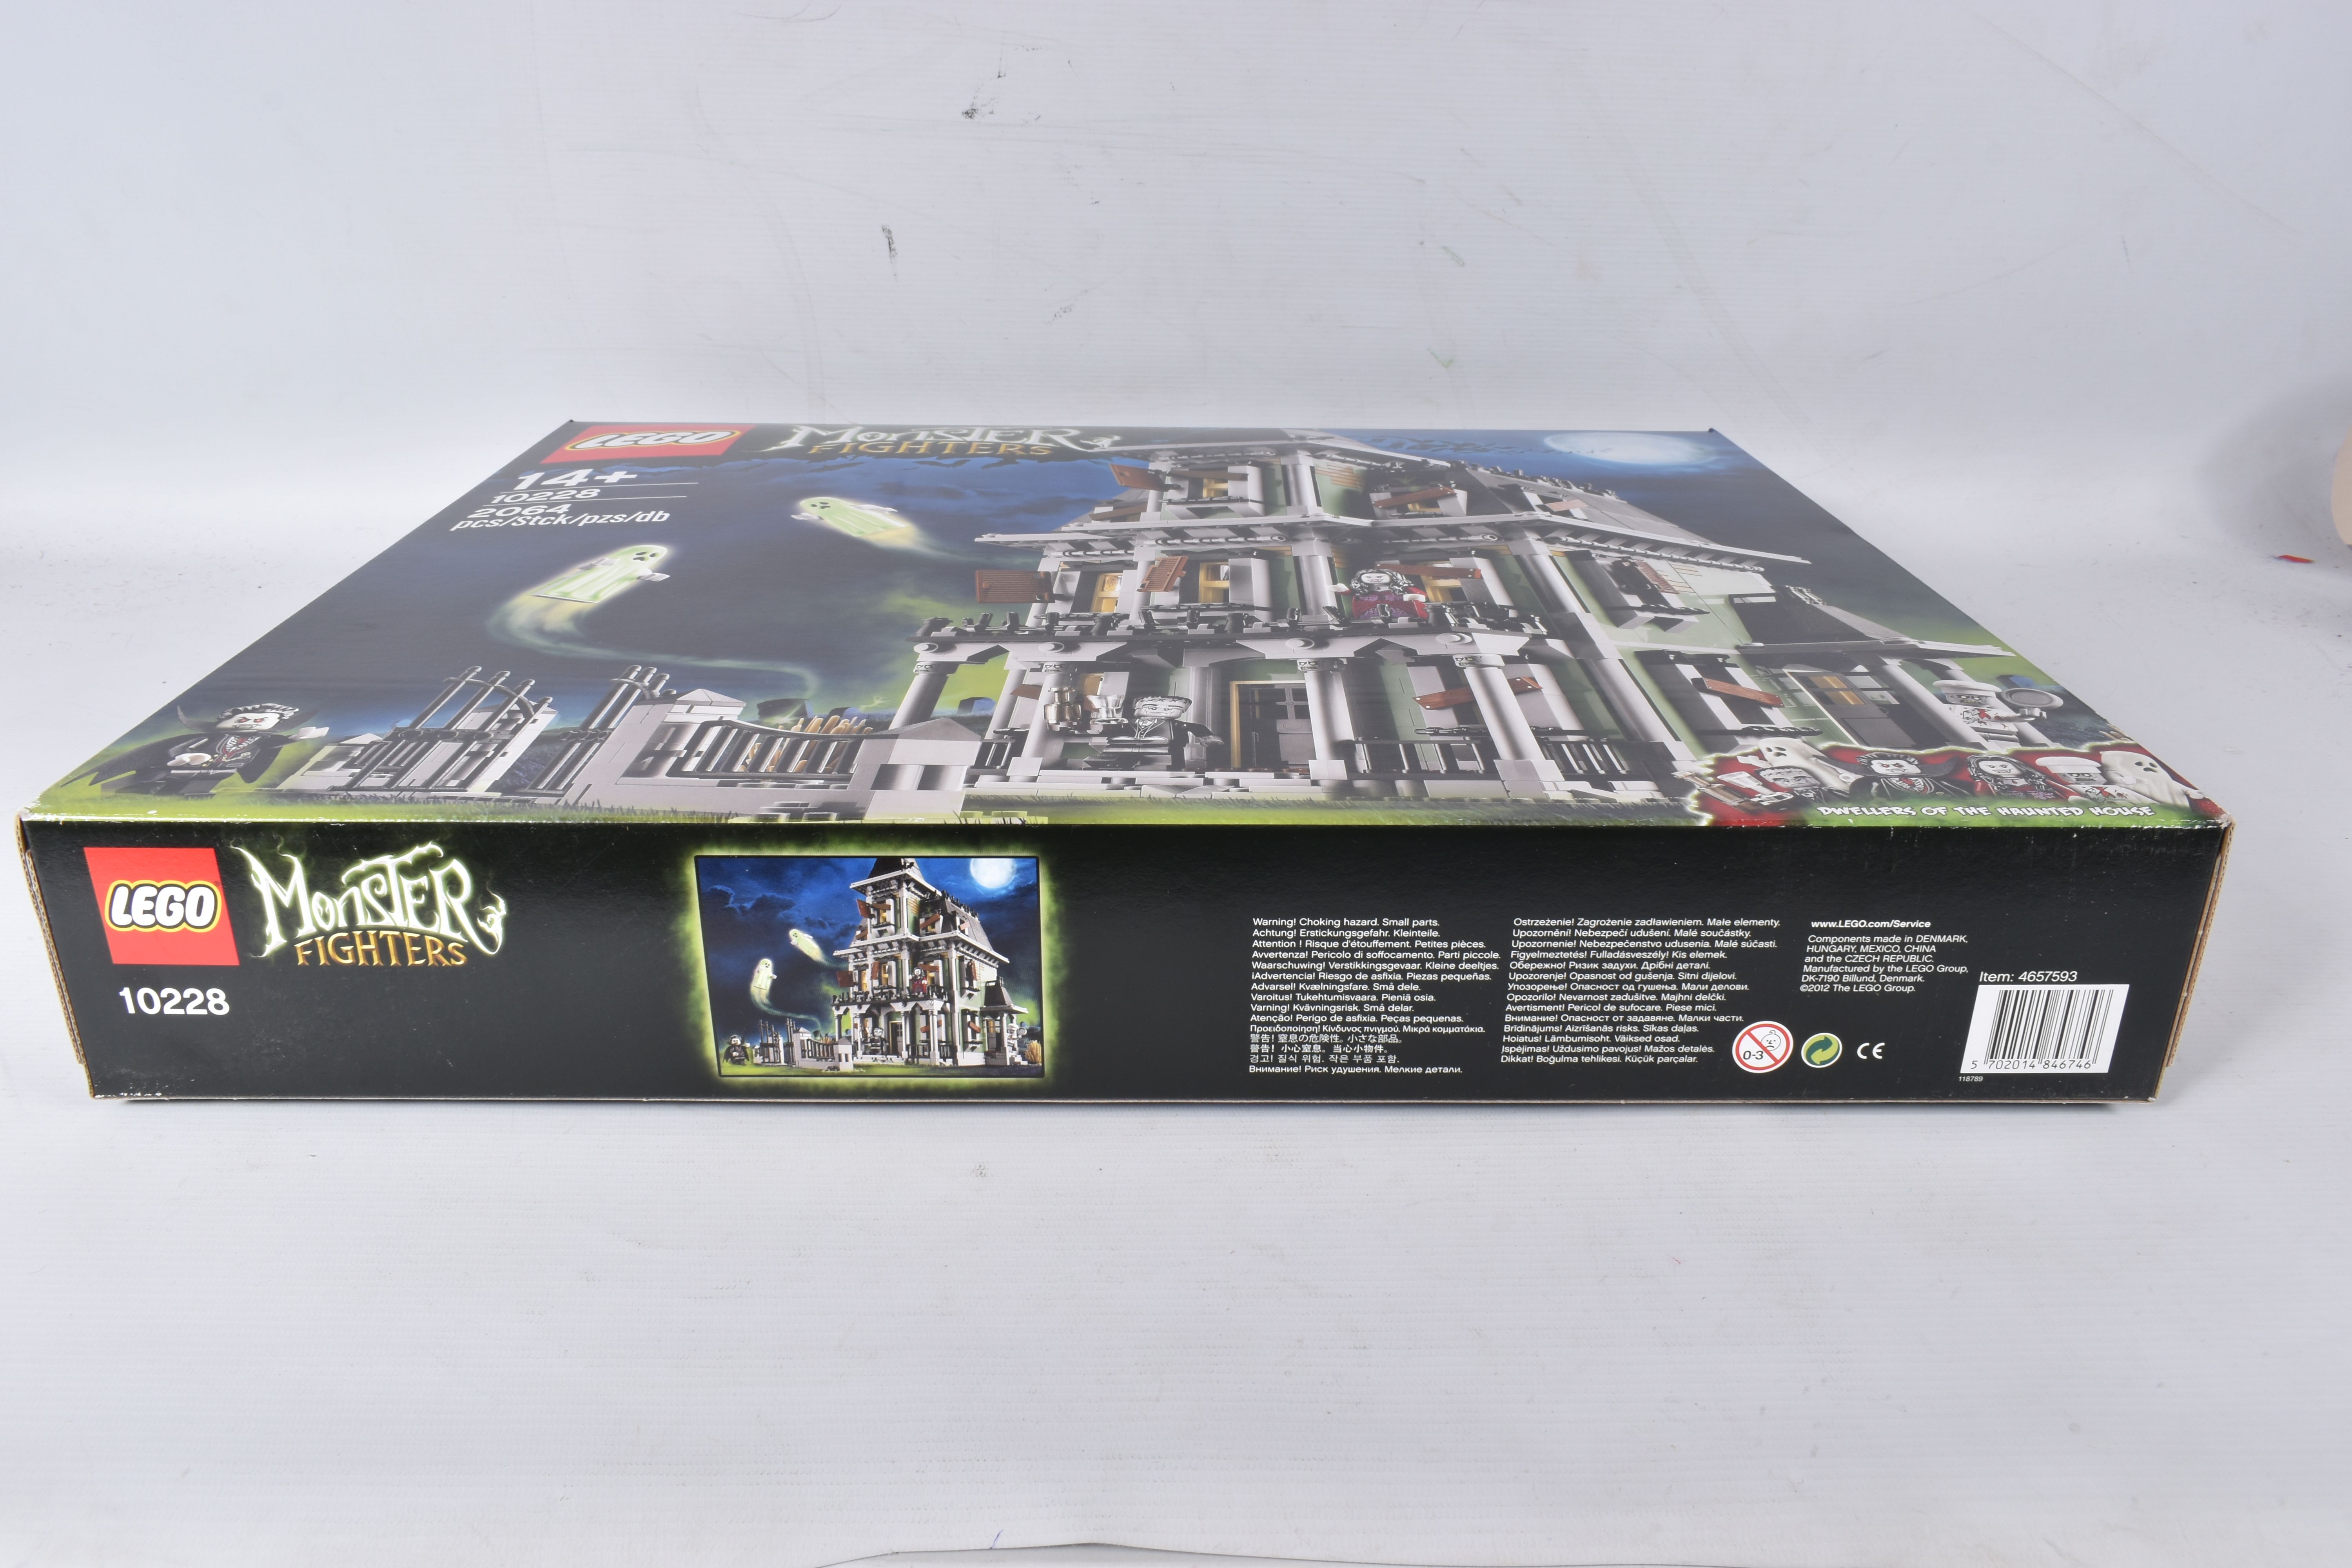 A FACTORY SEALED LEGO 'MONSTER FIGHTERS' HAUNTED HOUSE, model no. 10228, 2064 pieces, never opened - Image 17 of 27